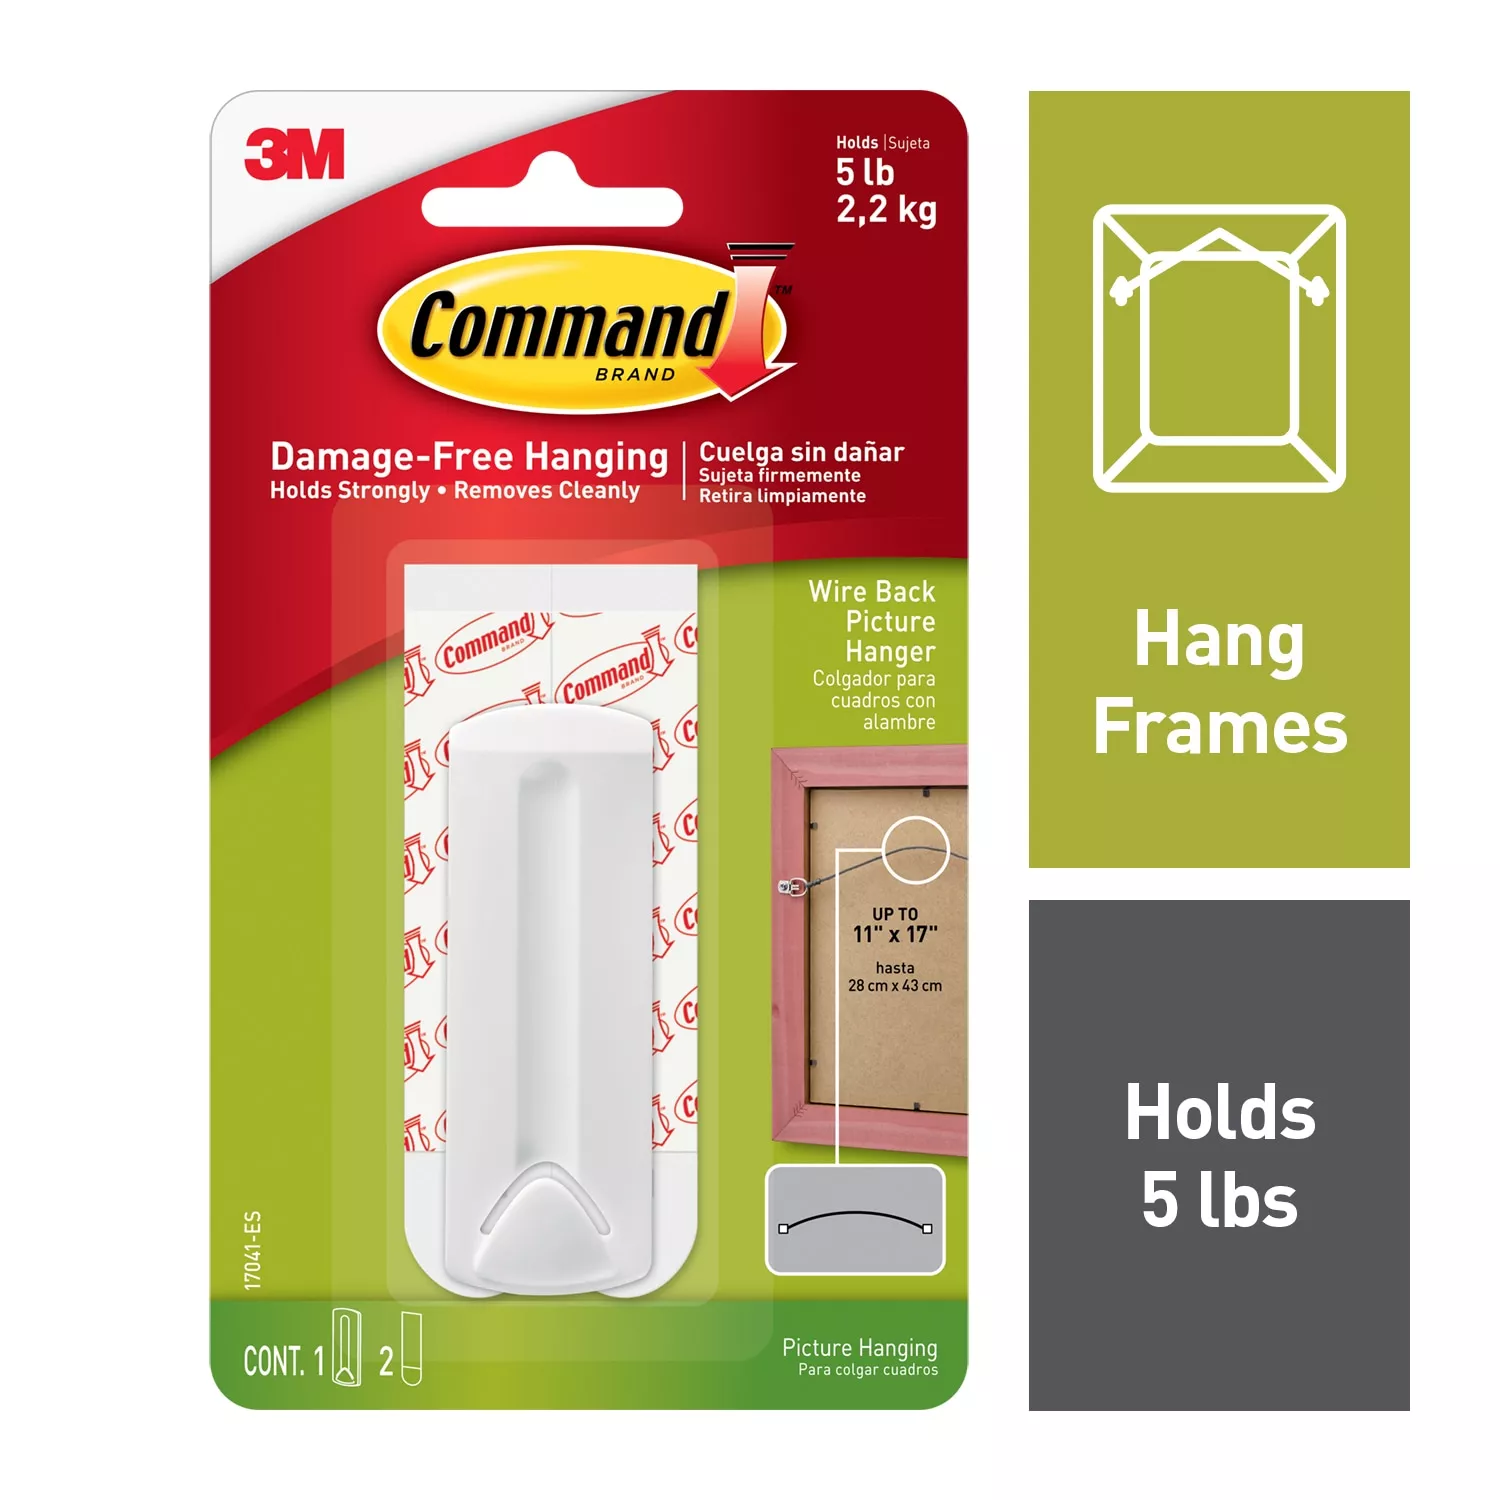 SKU 7100281153 | Command™ Wire Back Picture Hanger 17041-ES